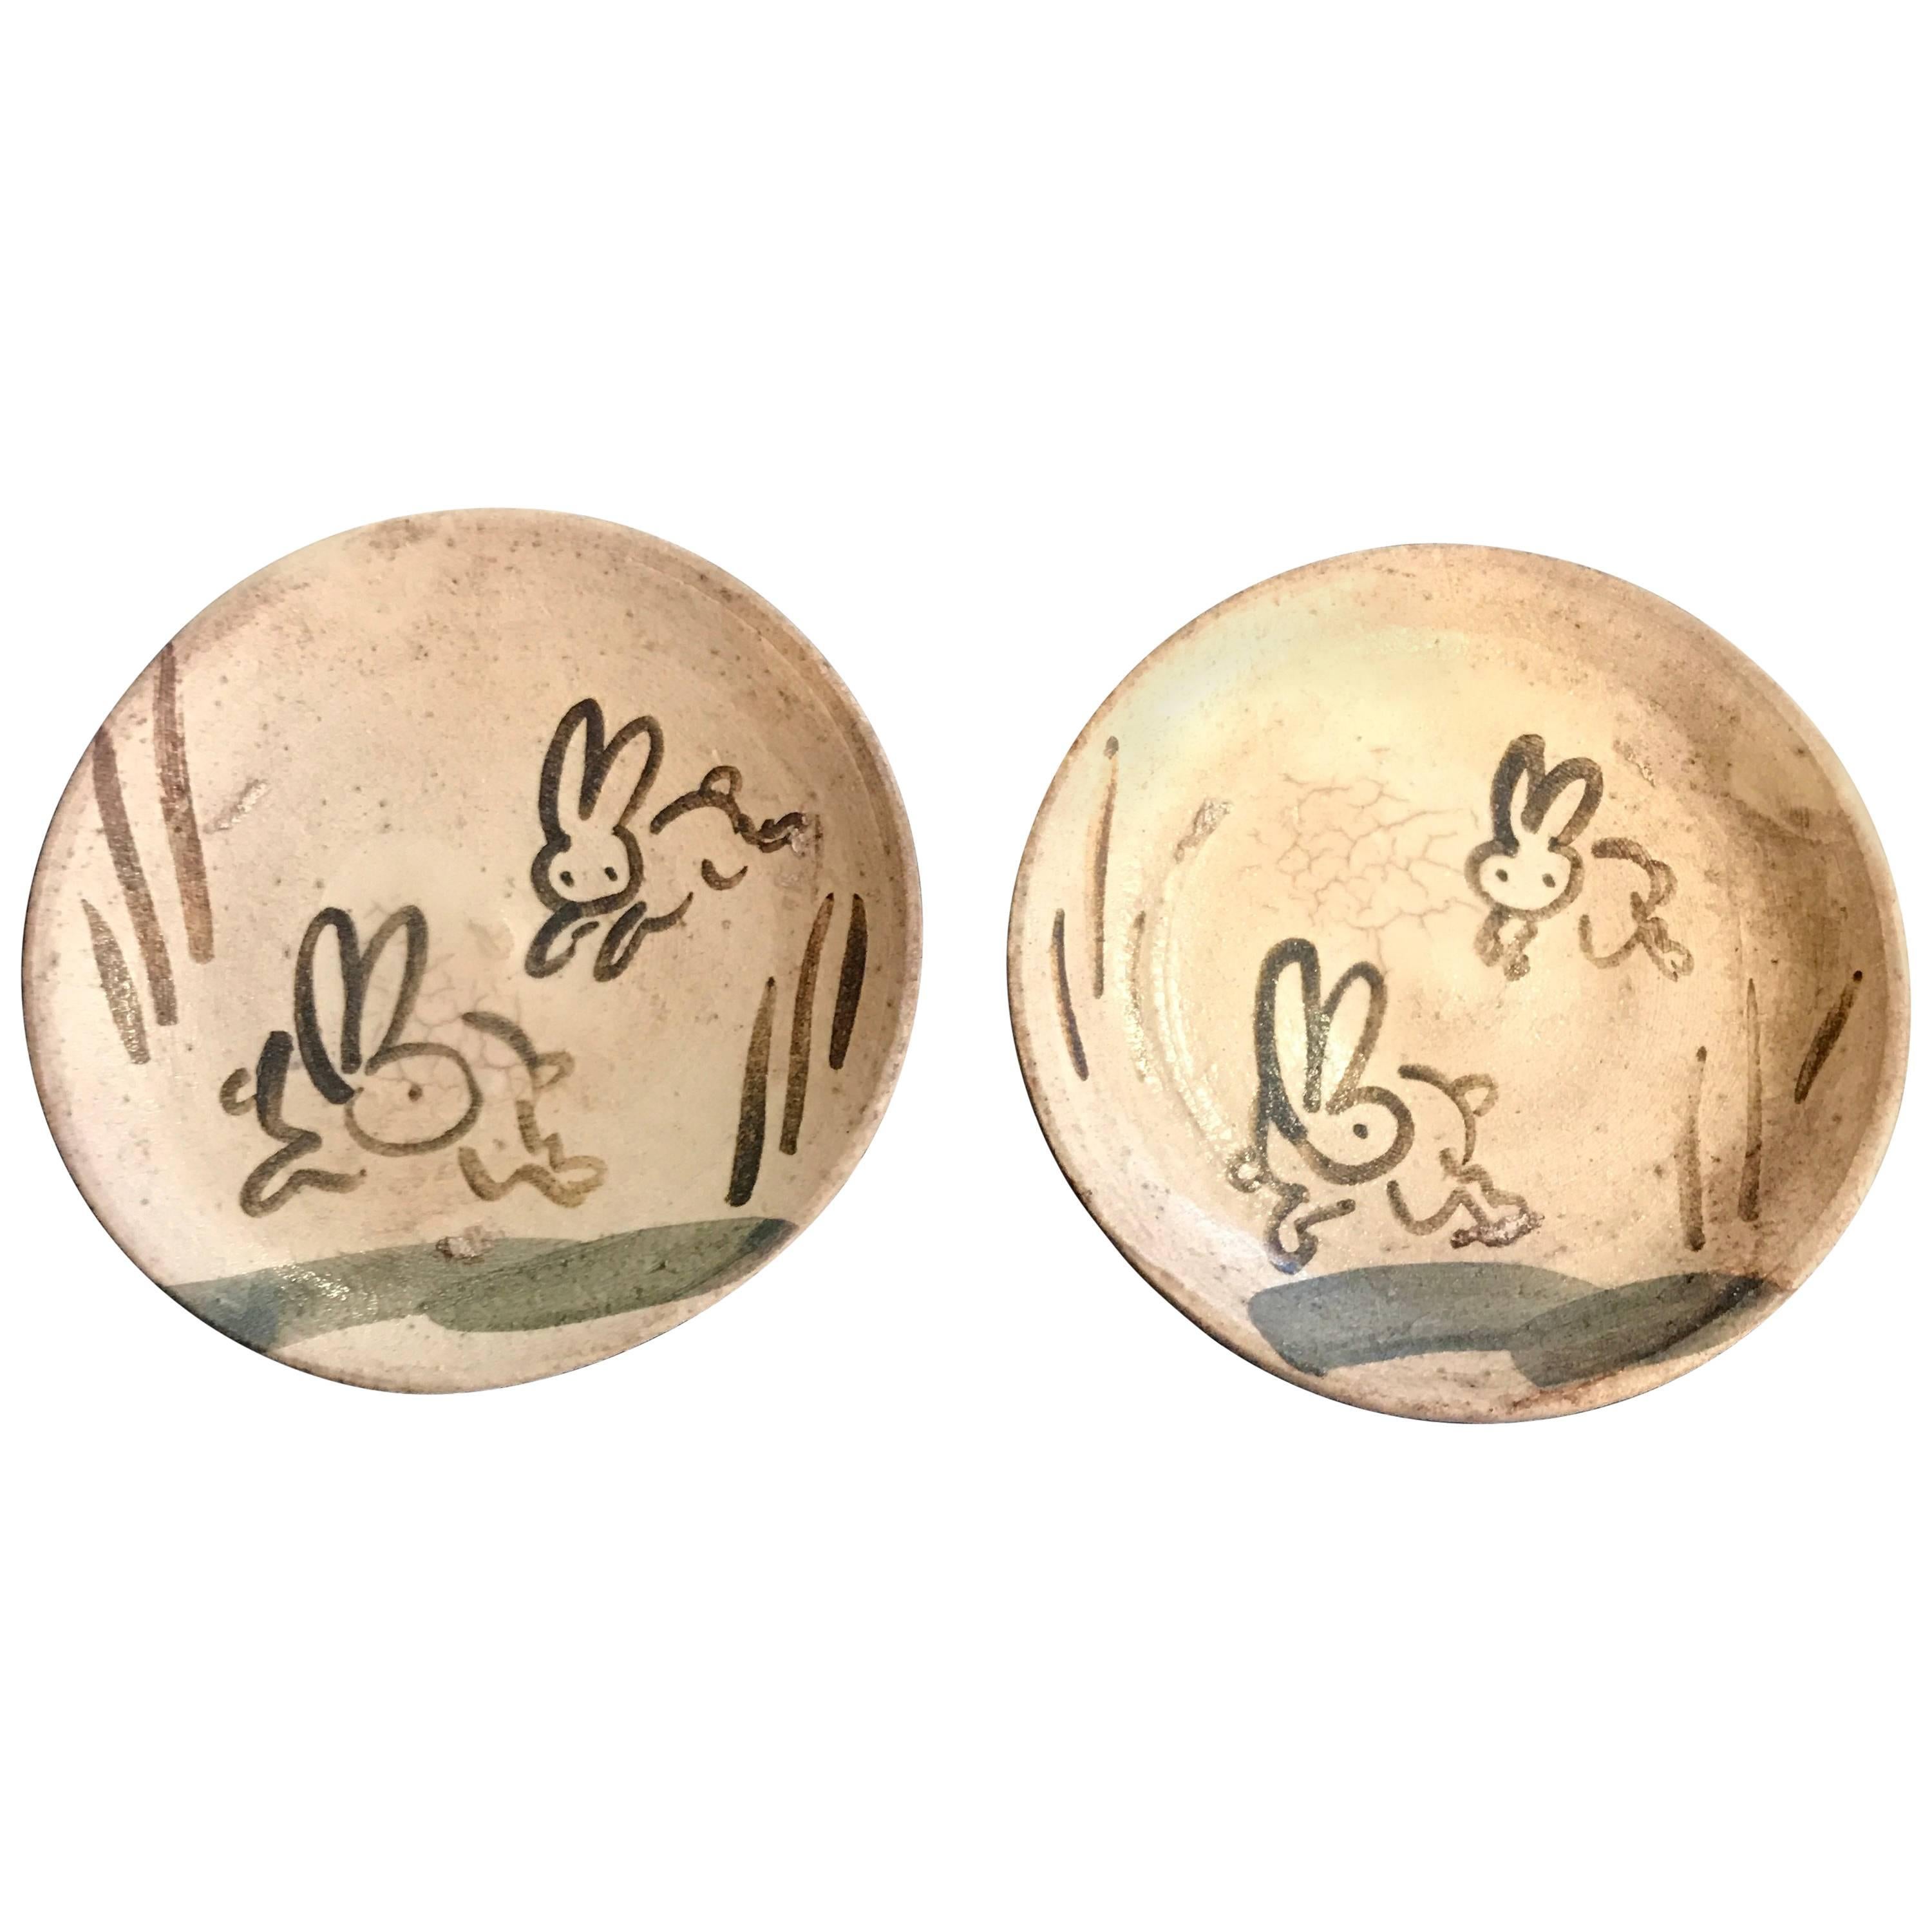 Old Japan Pair of Playful Rabbit Serving Plates Mint Condition